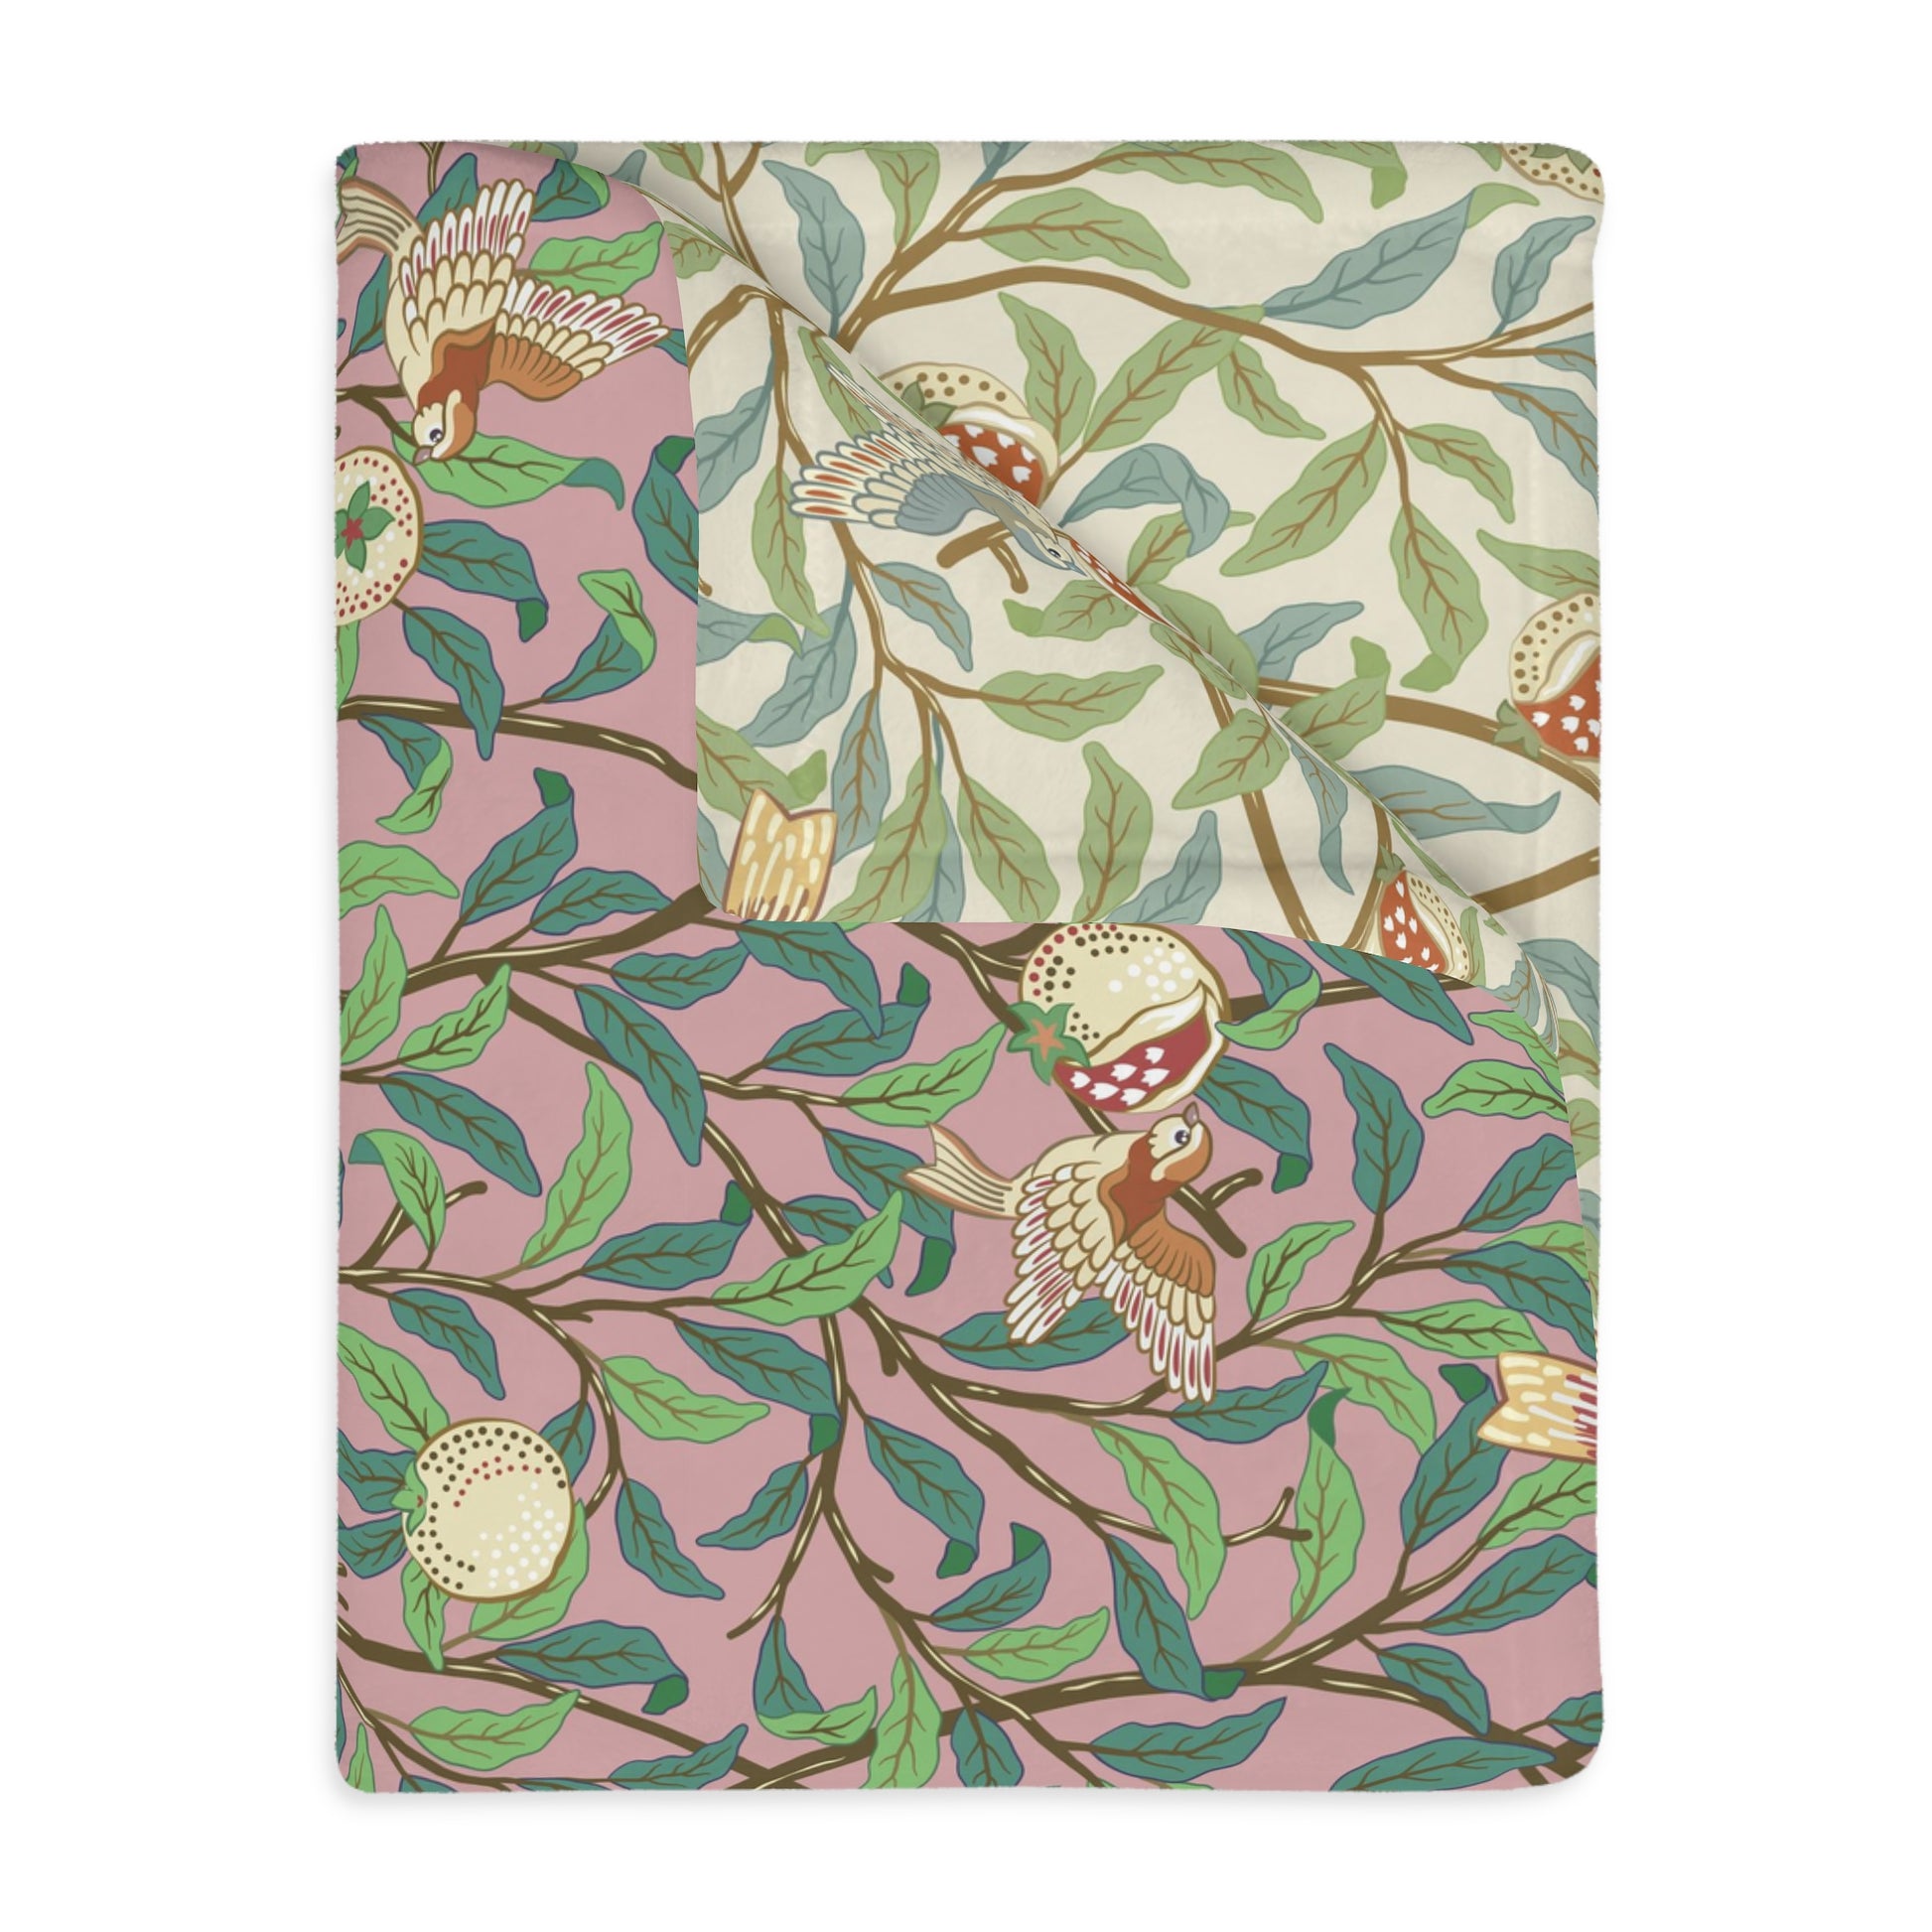 william-morris-co-luxury-velveteen-minky-blanket-two-sided-print-bird-and-pomegranate-collection-rosella-parchment-5